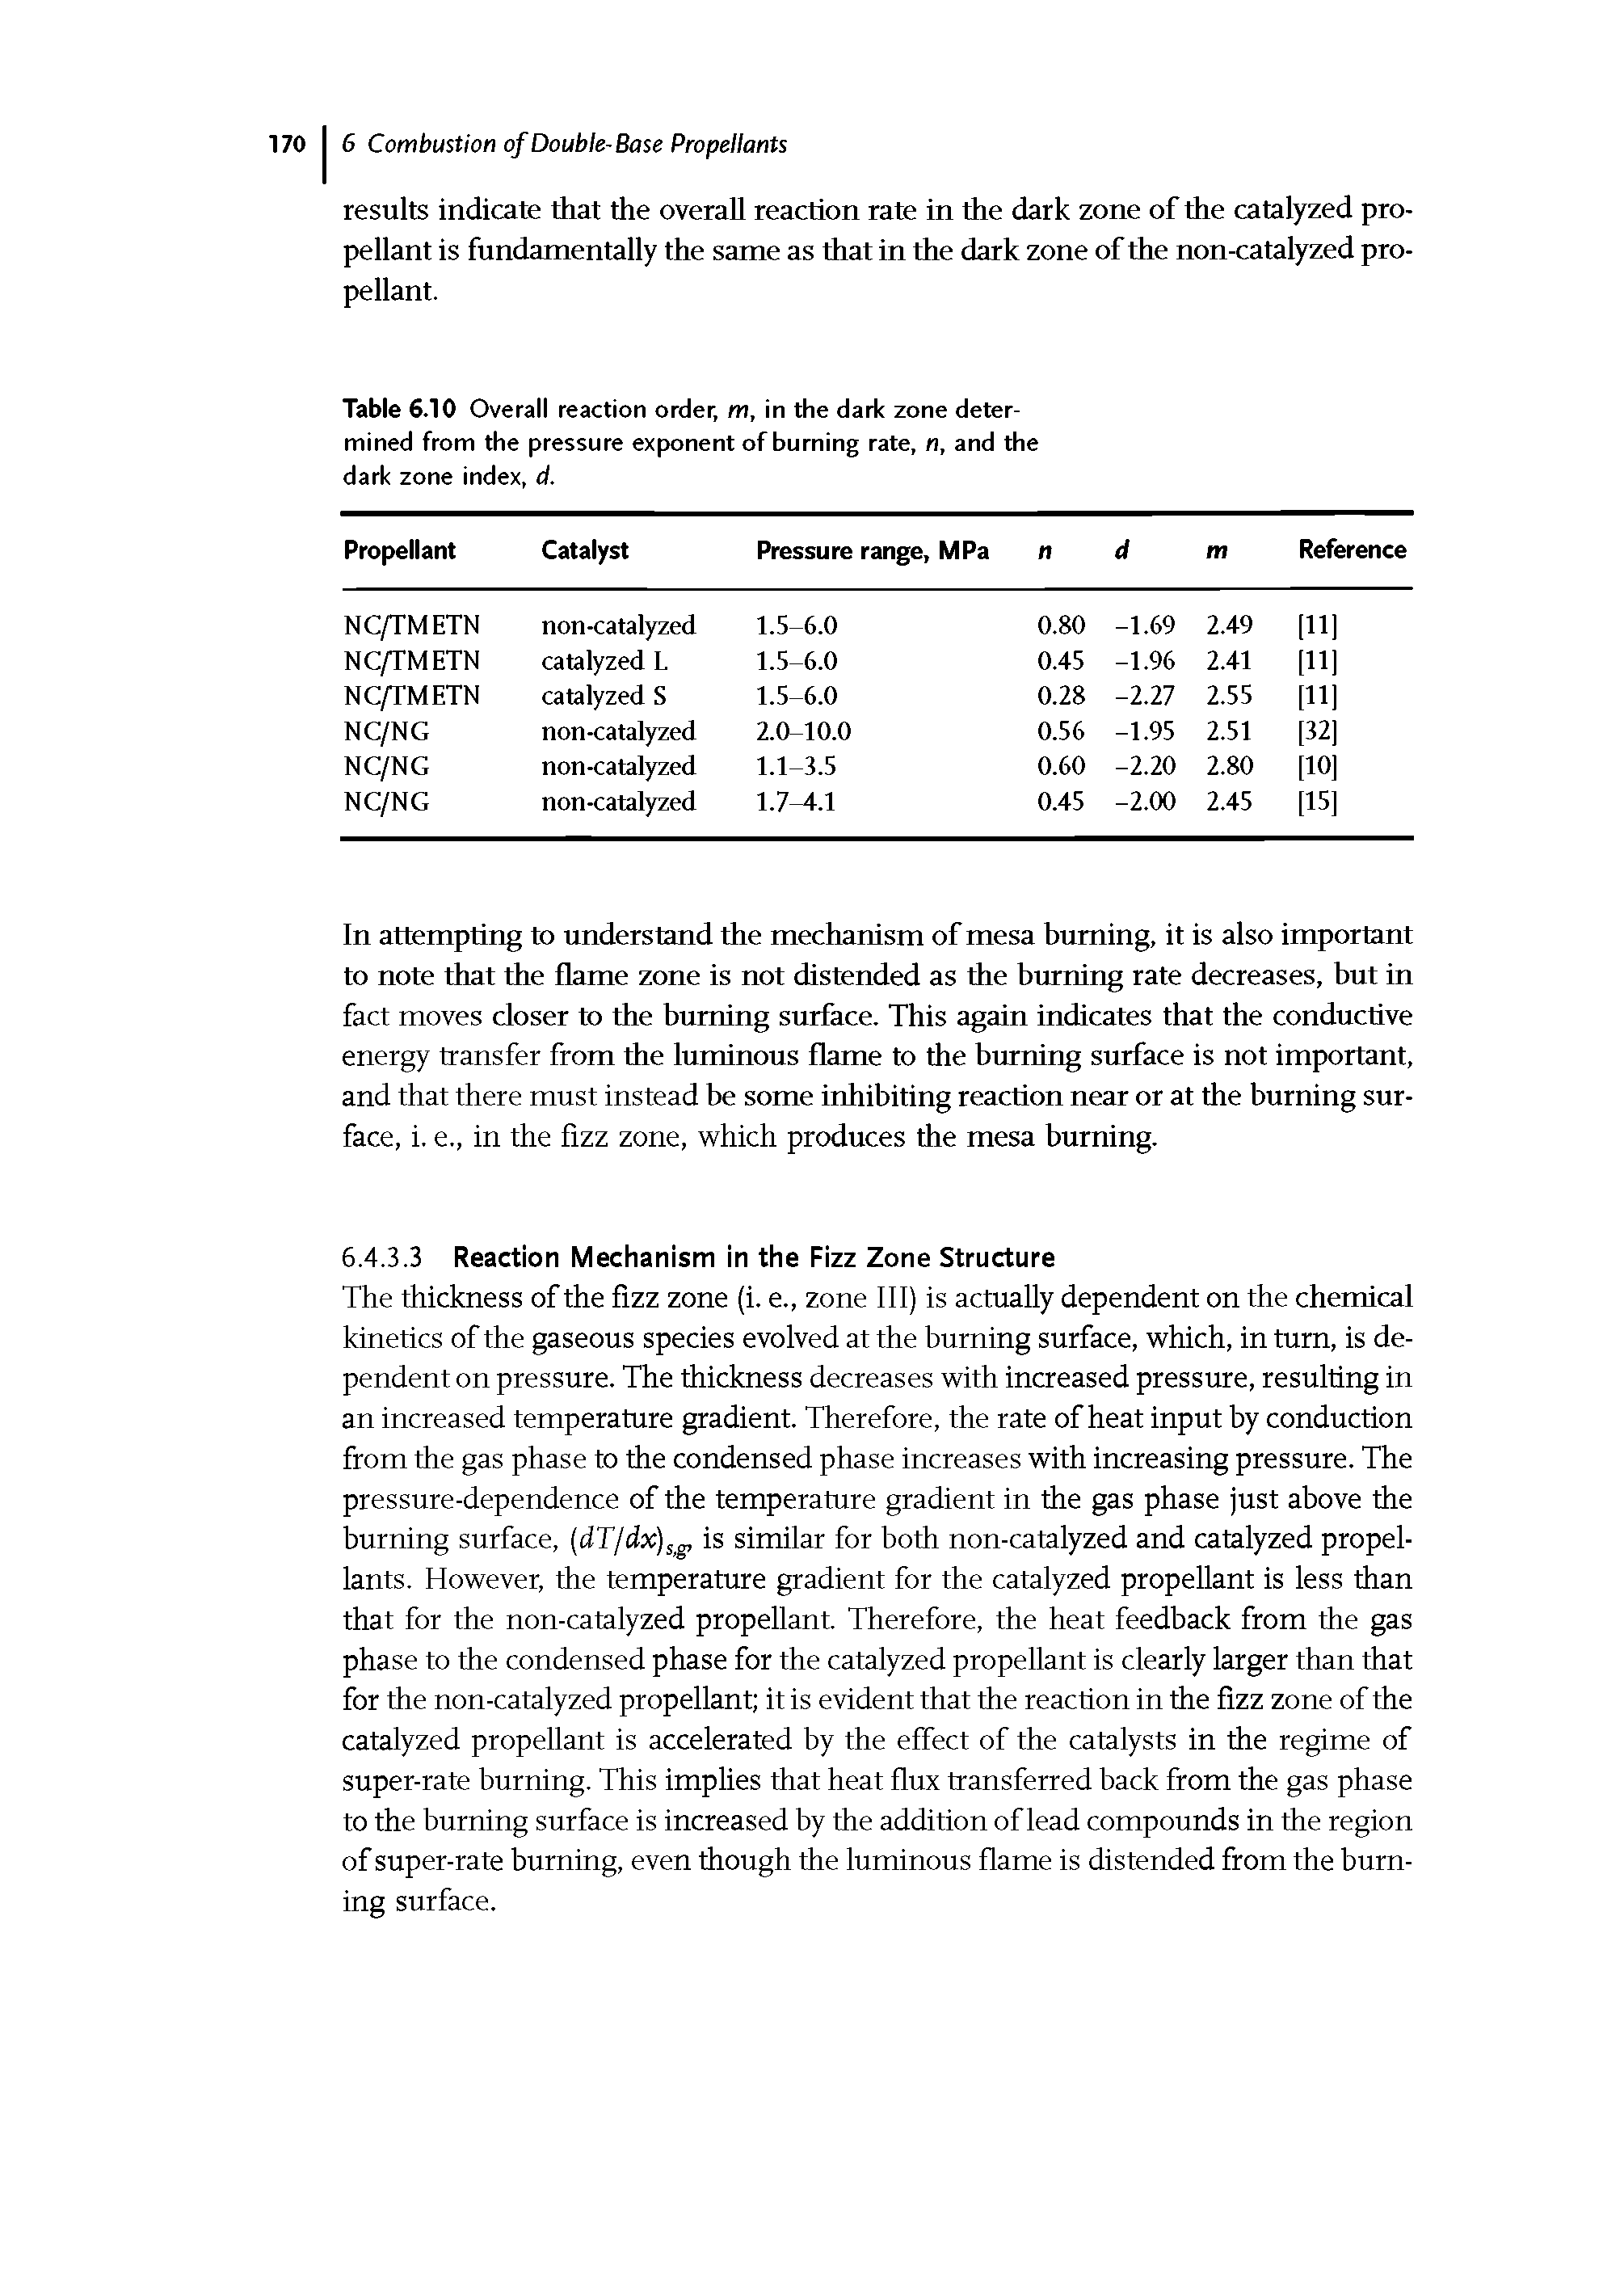 Table 6.10 Overall reaction order, m, in the dark zone determined from the pressure exponent of burning rate, n, and the dark zone index, d.